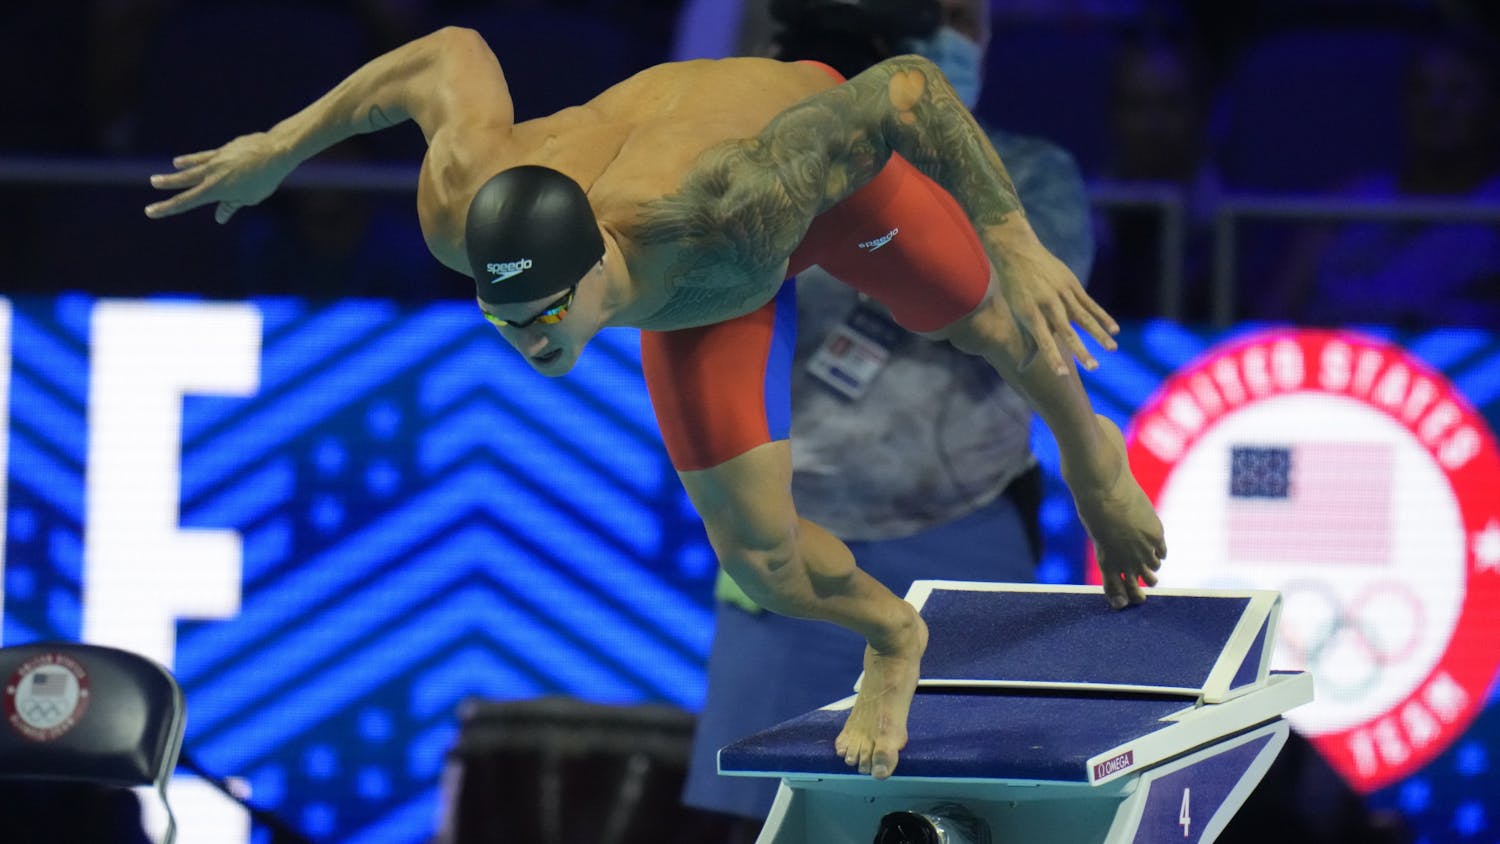 Caeleb Dressel participates in the men's 50 freestyle during wave 2 of the U.S. Olympic Swim Trials in Omaha, Neb on June 20, 2021. (AP Photo/Jeff Roberson)